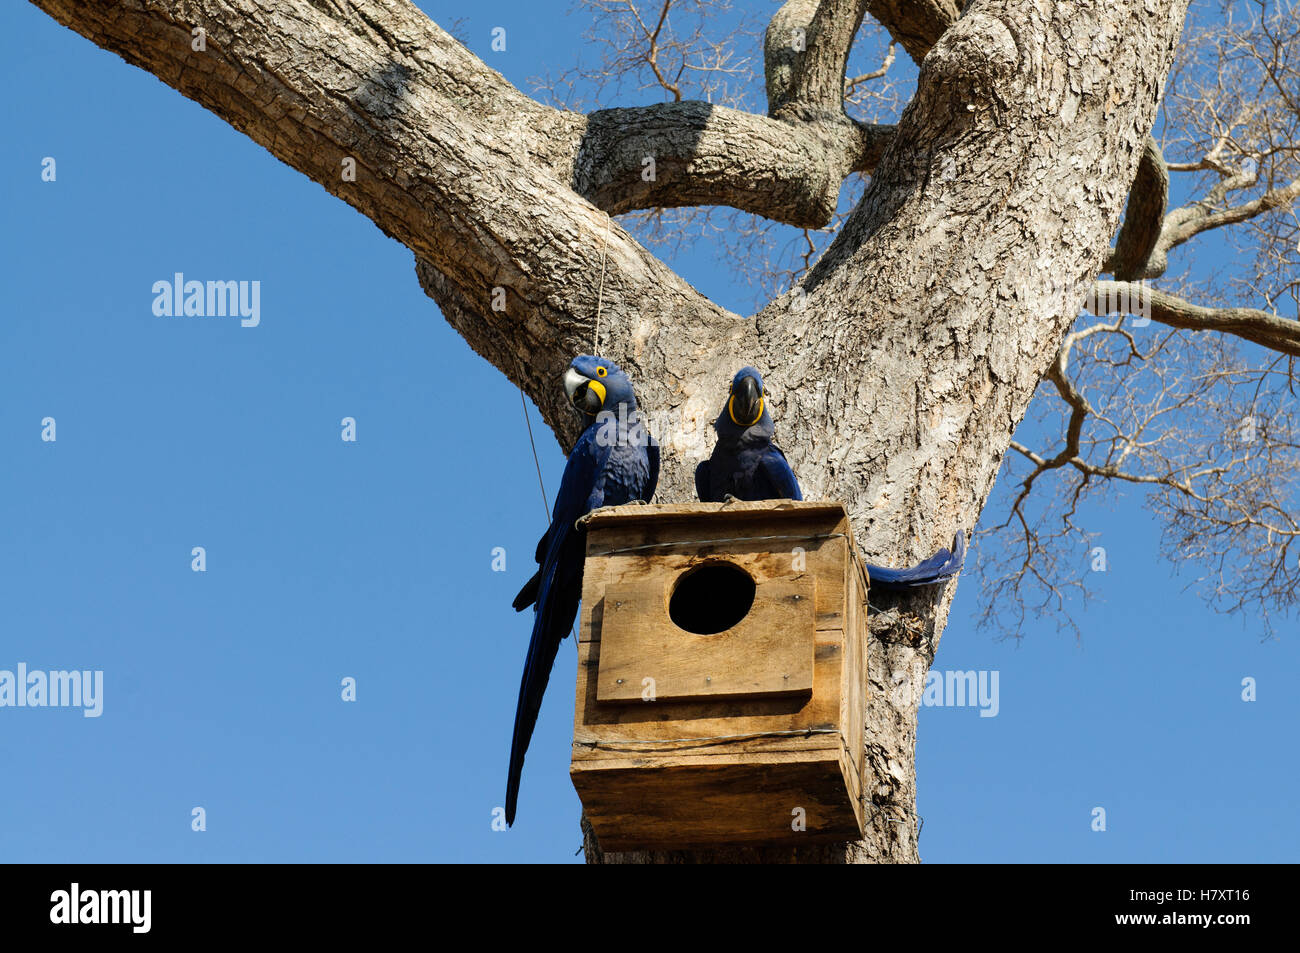 Hyacinth Macaw (Anodorhynchus hyacinthinus) pair on nest box installed by researcher Neiva Guedes, Pantanal, Brazil Stock Photo